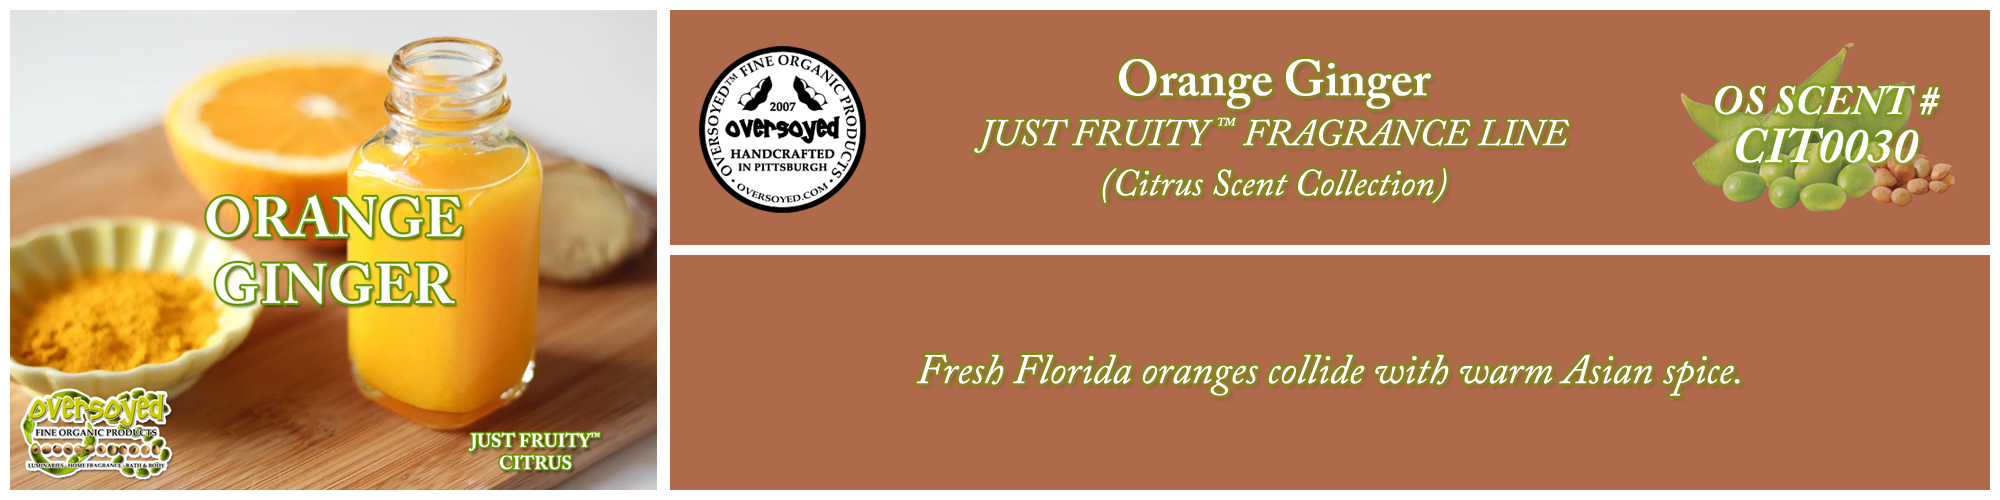 Orange Ginger Handcrafted Products Collection